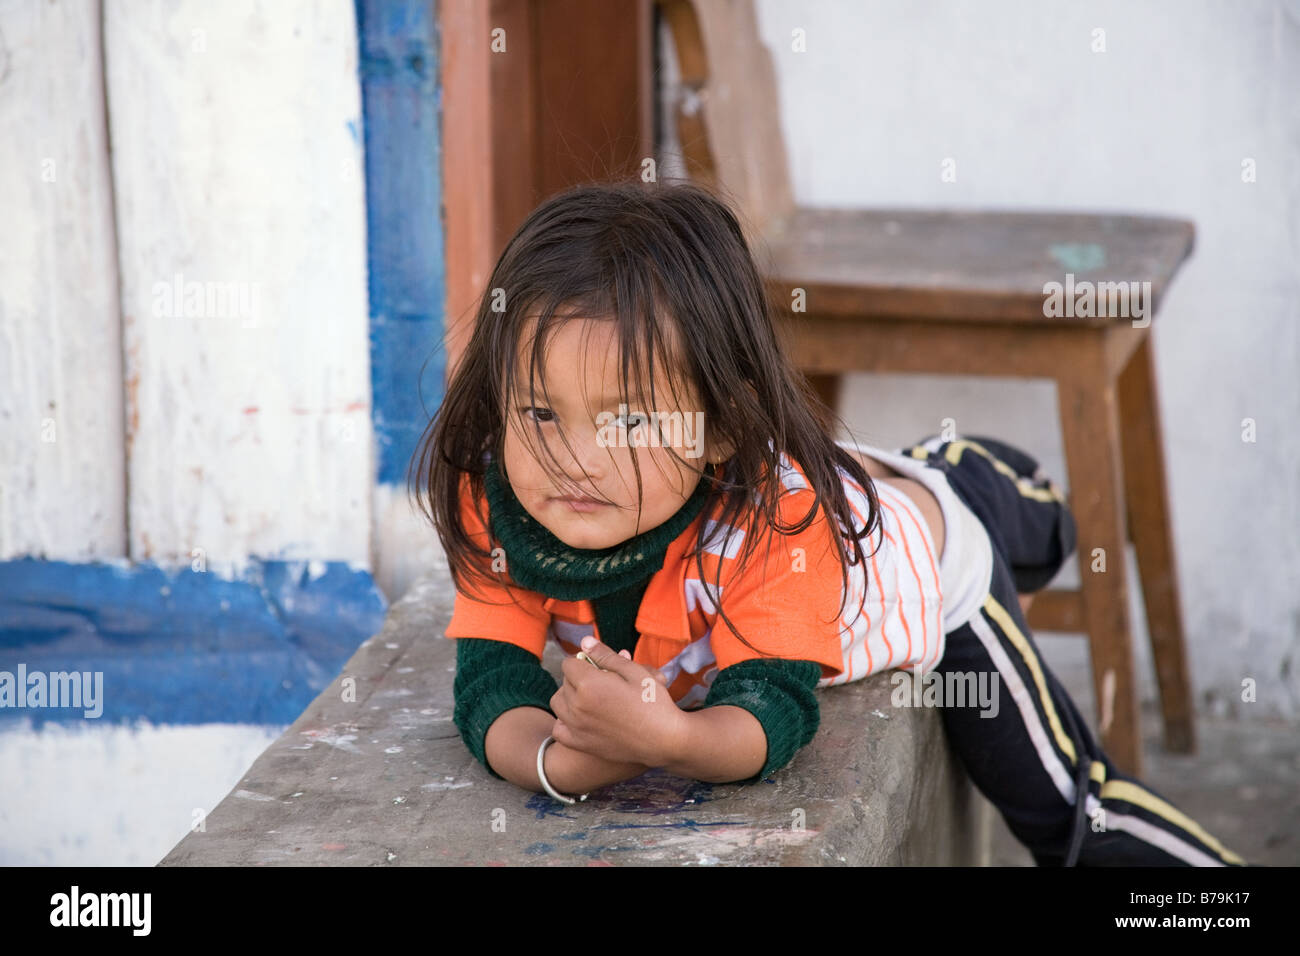 A young girl, looking at the camera with an enigmatic smile, lies on a bench in Jakar, central Bhutan Stock Photo